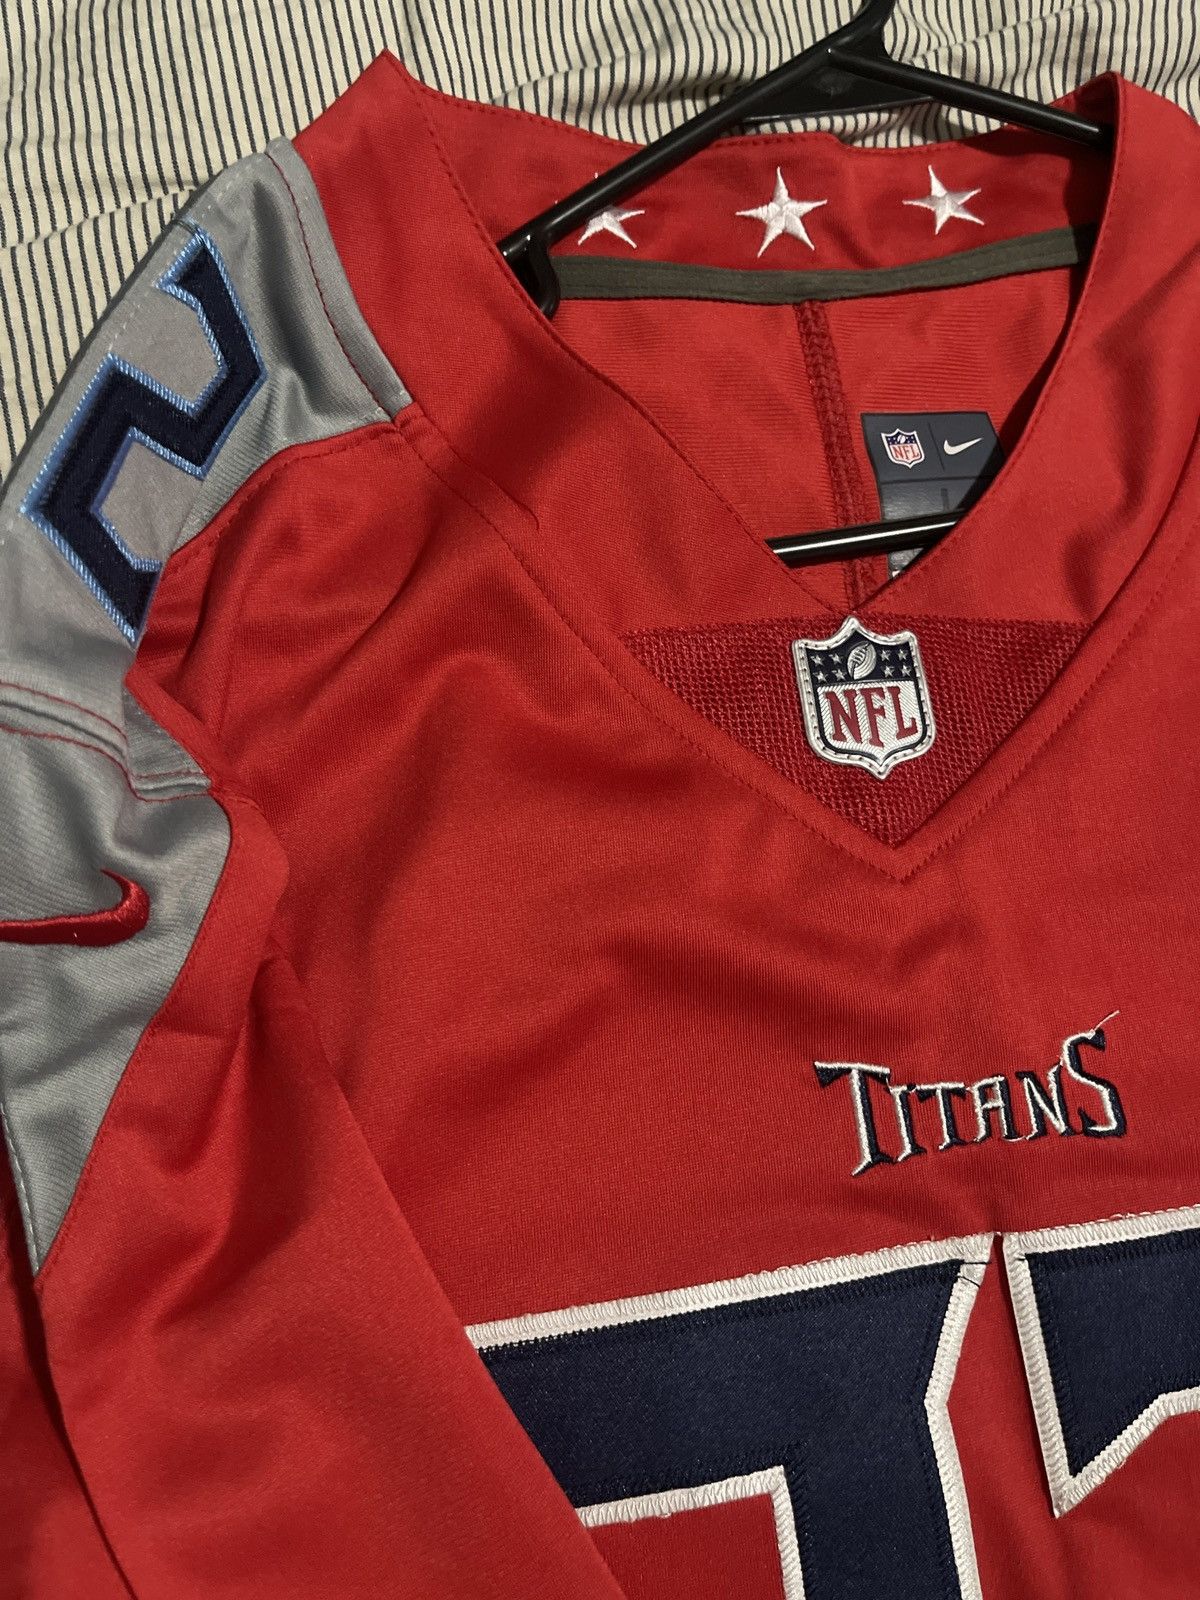 Nike Derrick Henry Tennessee Titans Red Jersey New Sz Large